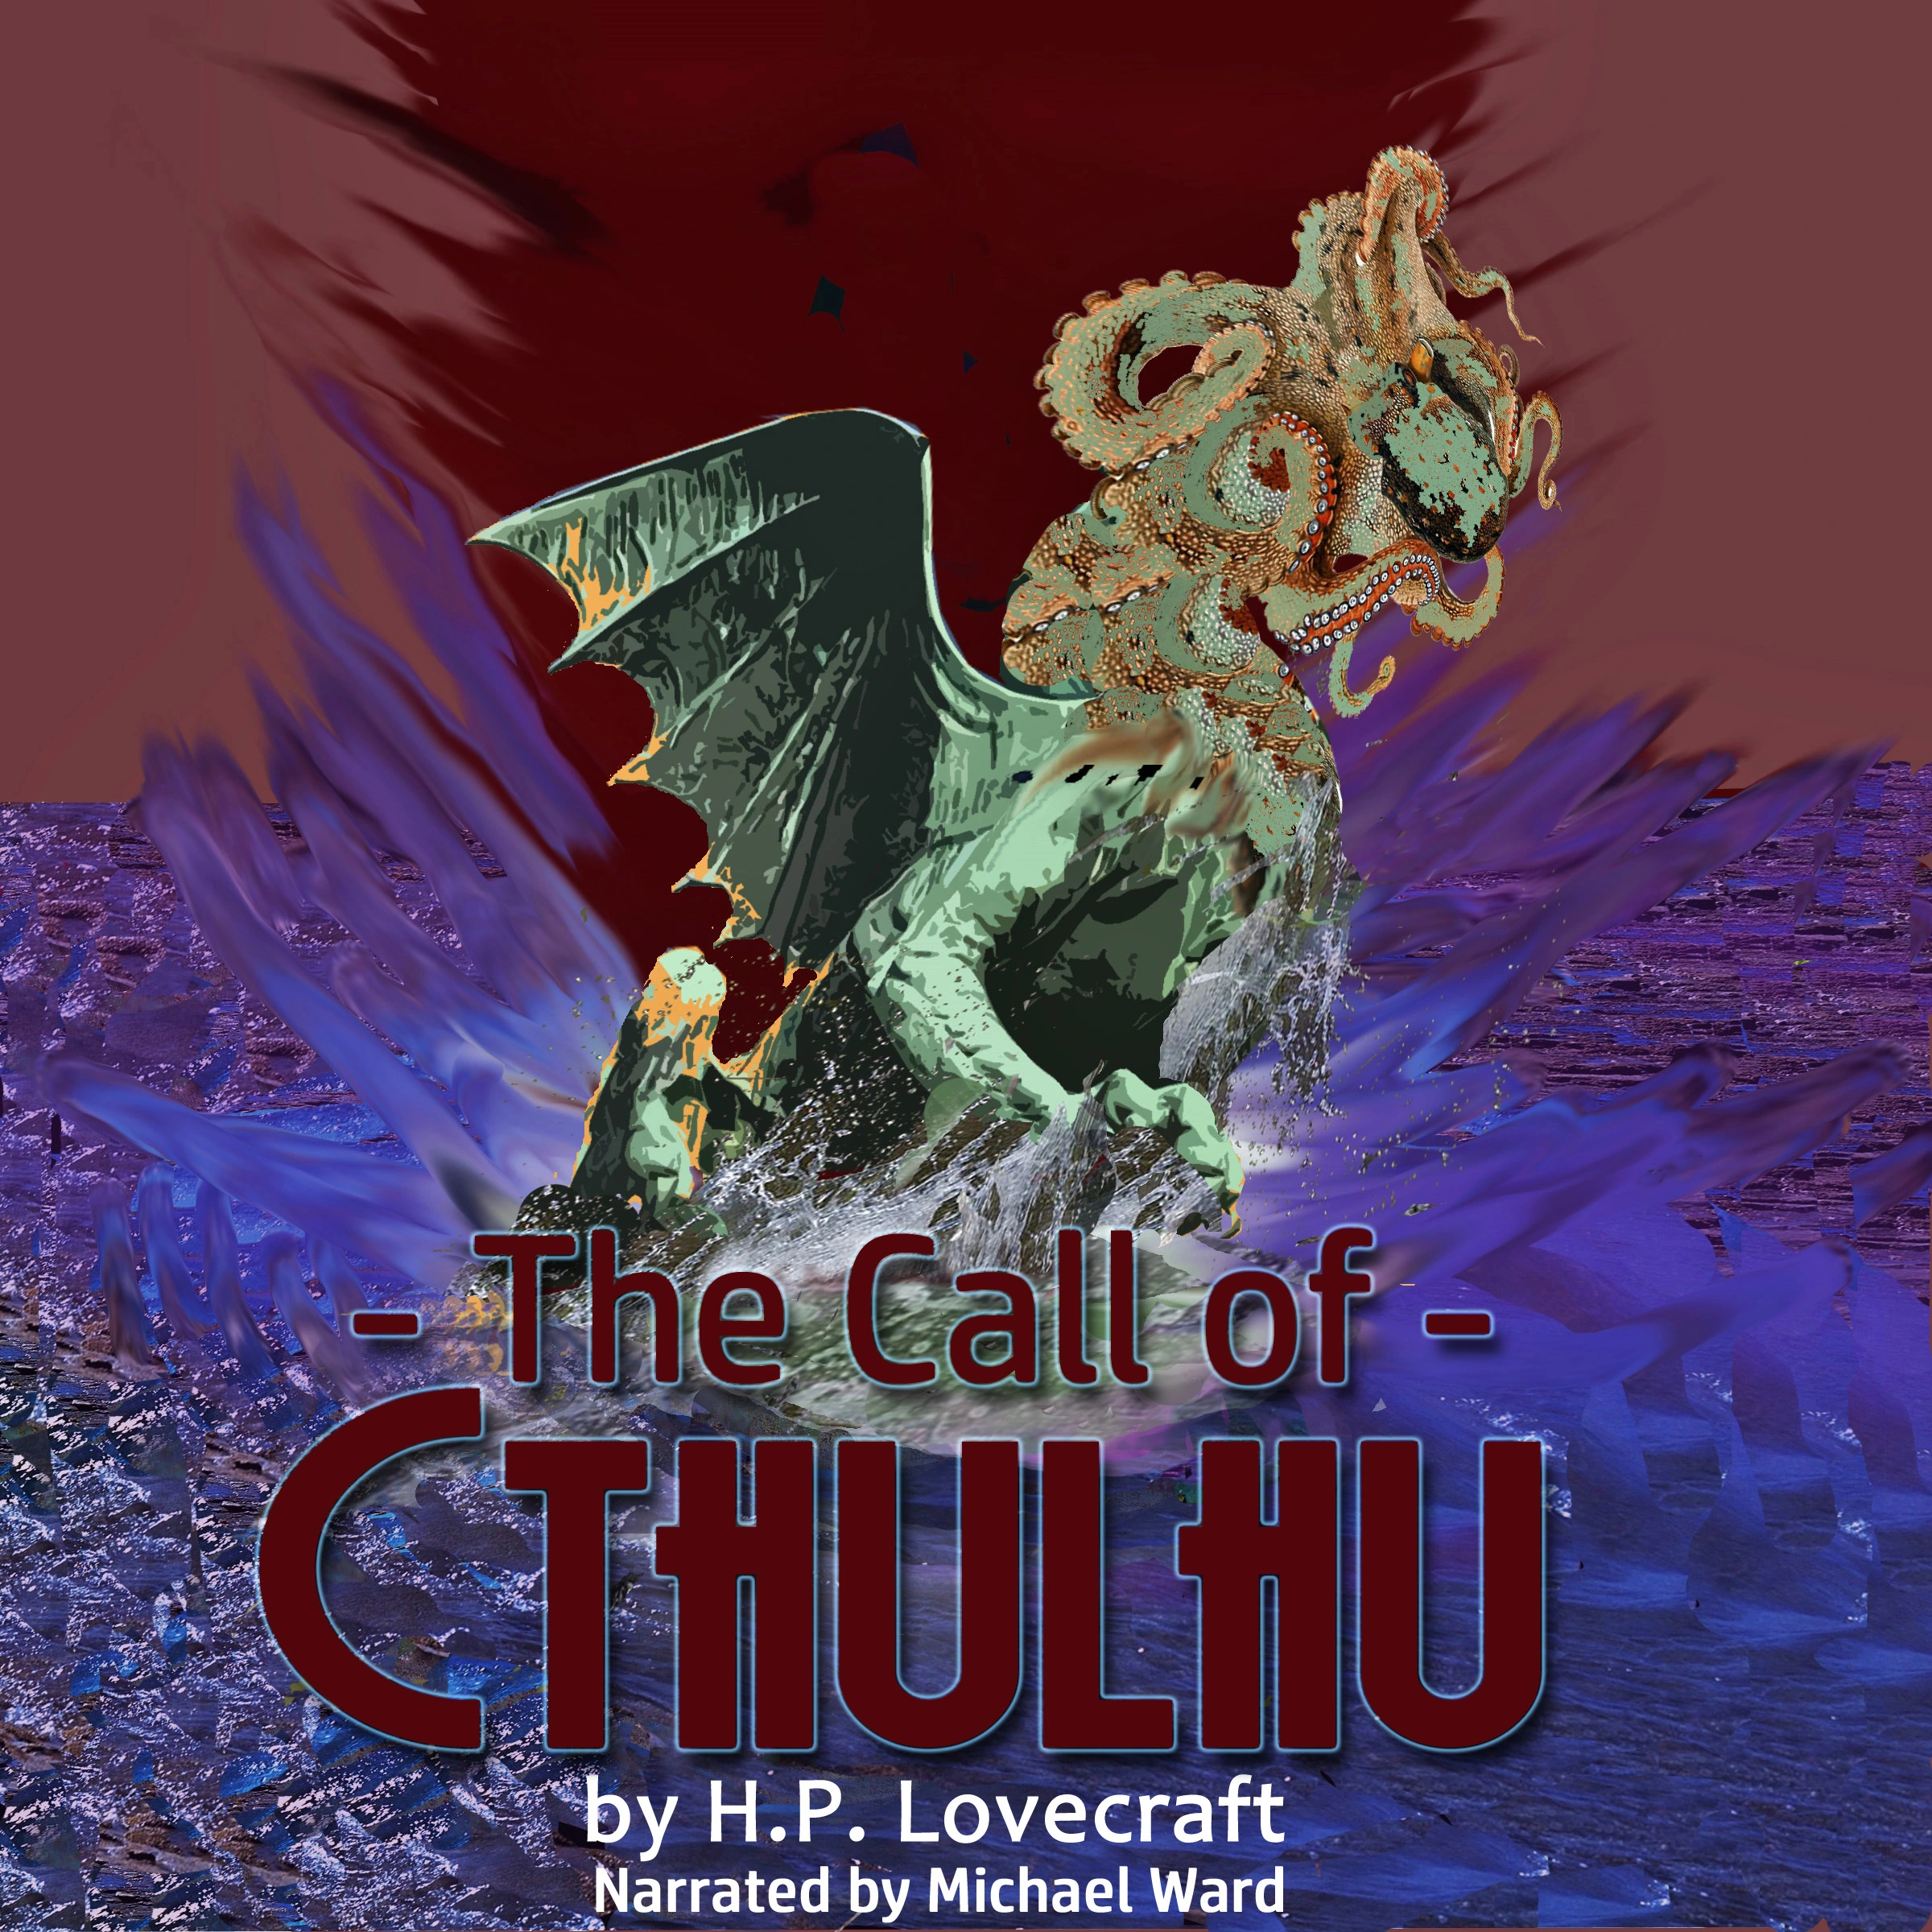 The Call of Cthulhu by H.P Lovecraft Audiobook